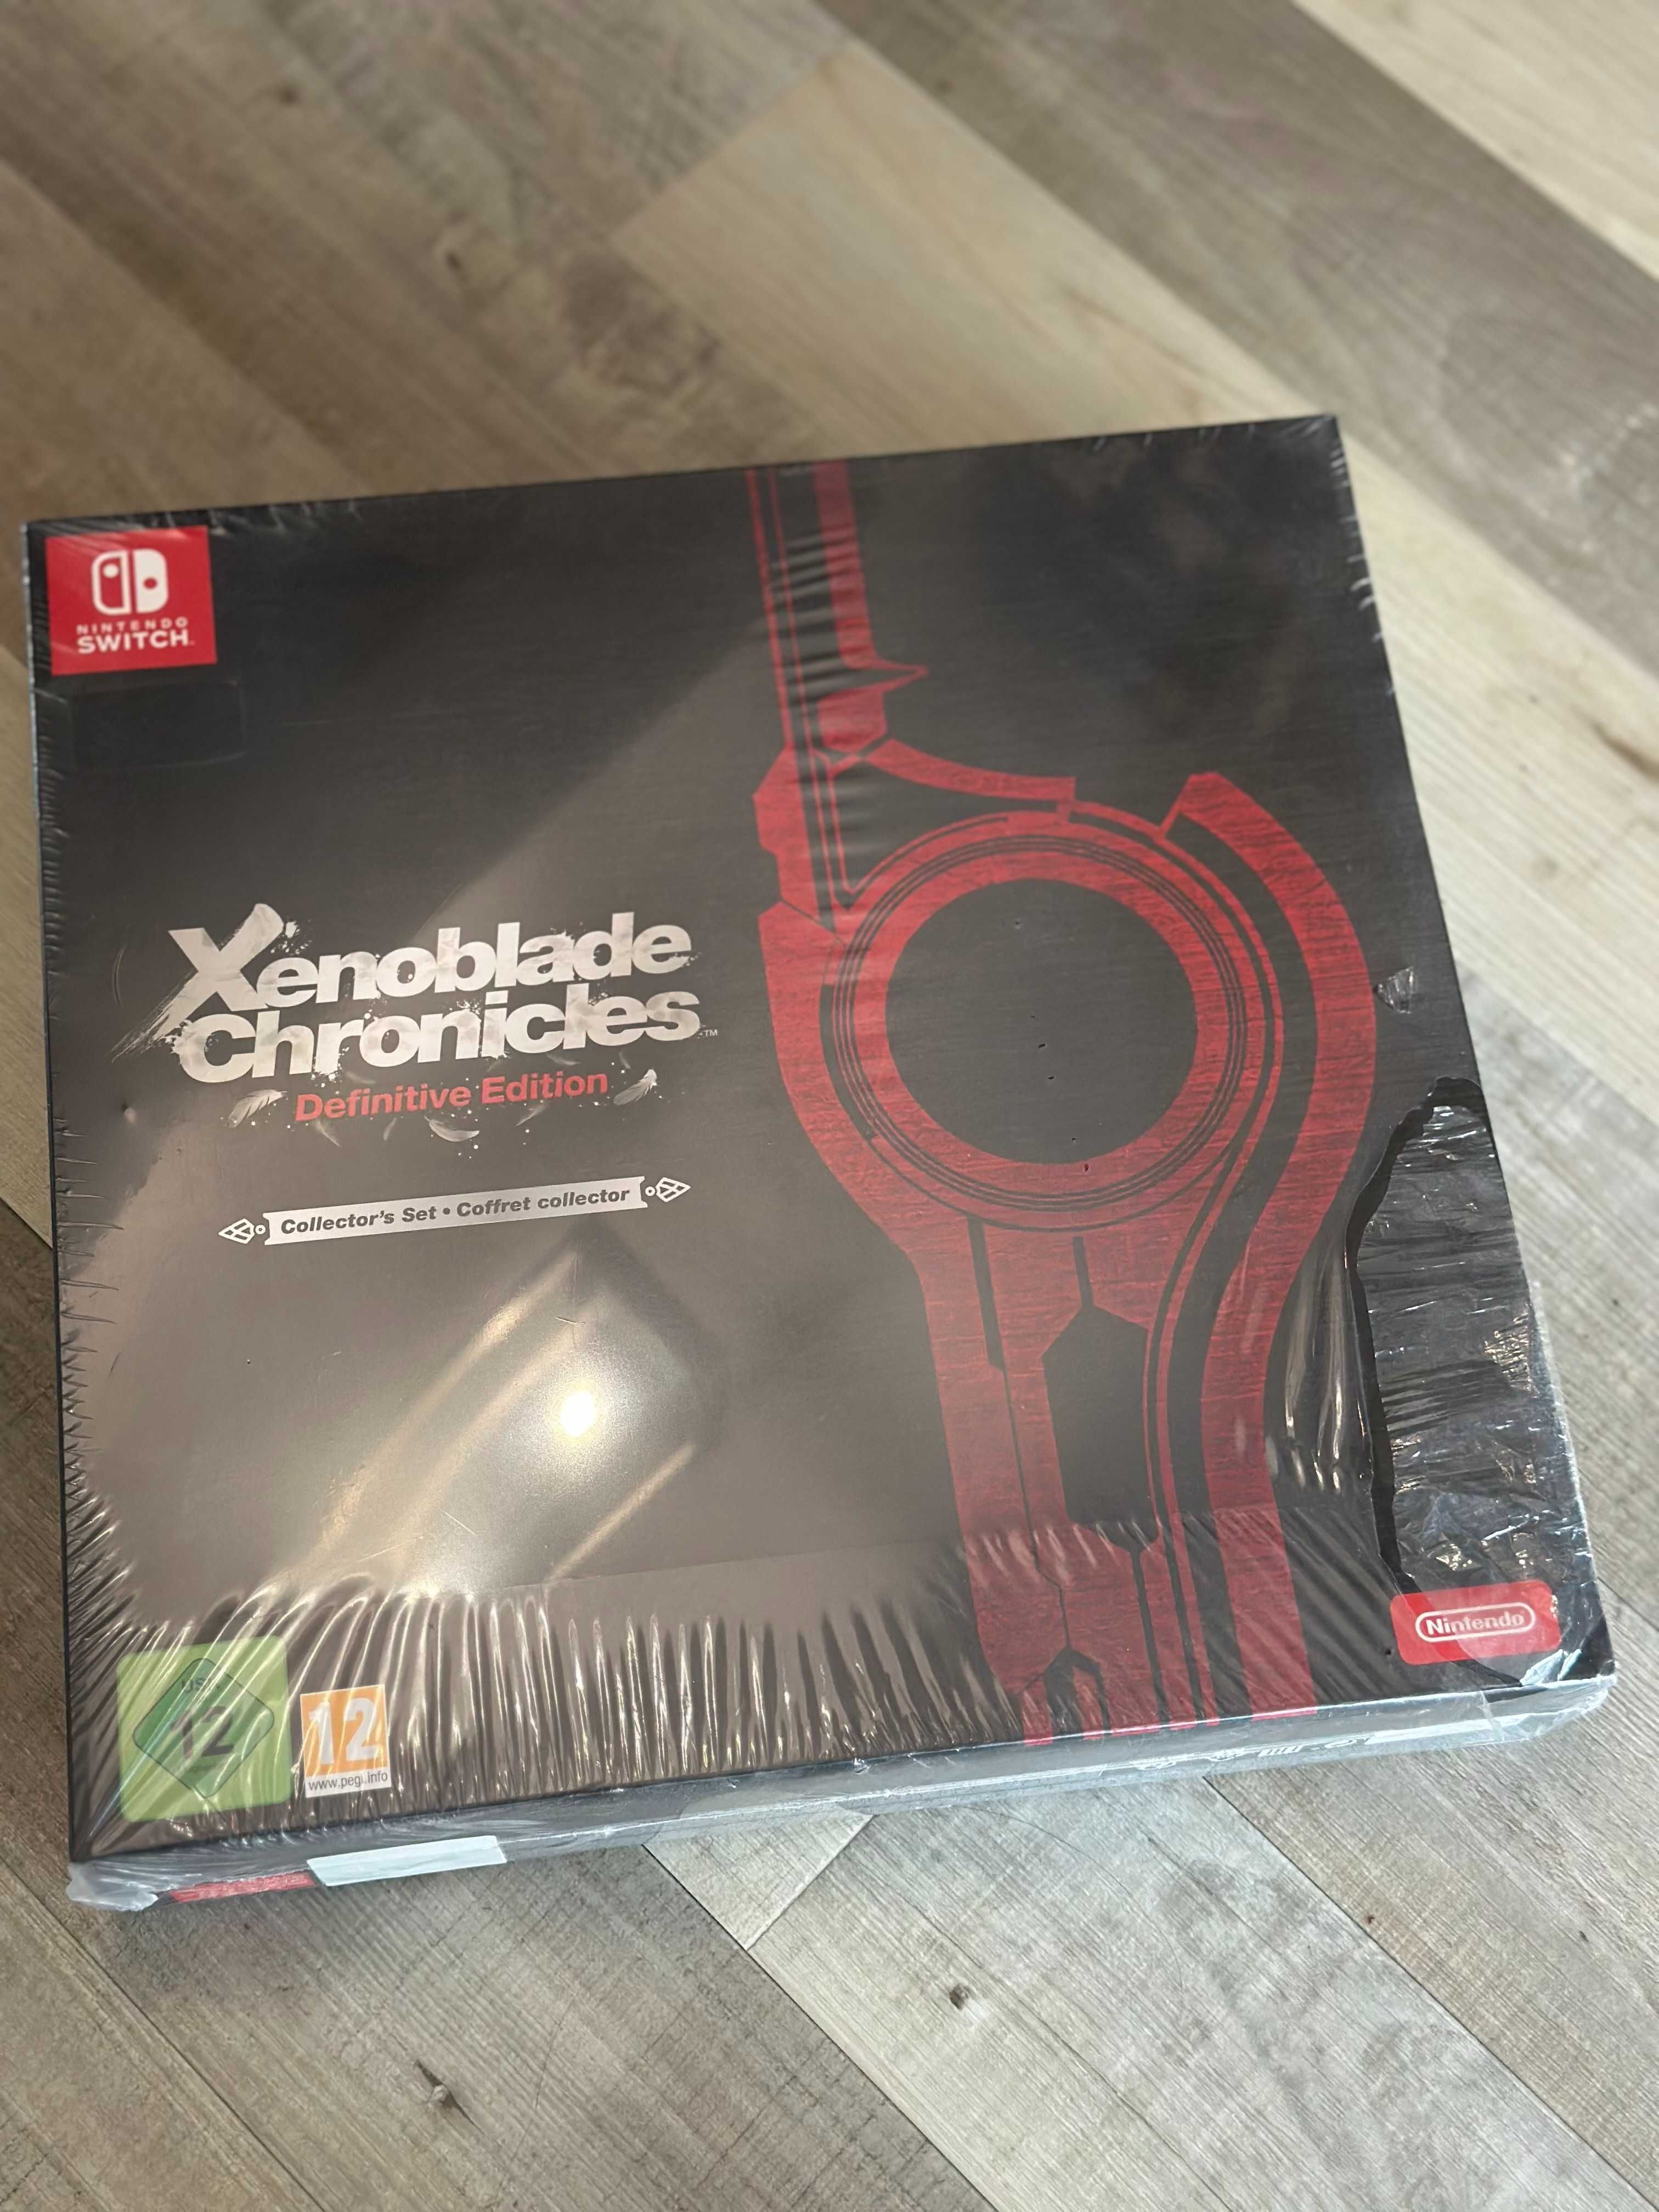 NOWE! UNIKAT ! Xenoblade Chronicles Definitive Edition Collector's Set